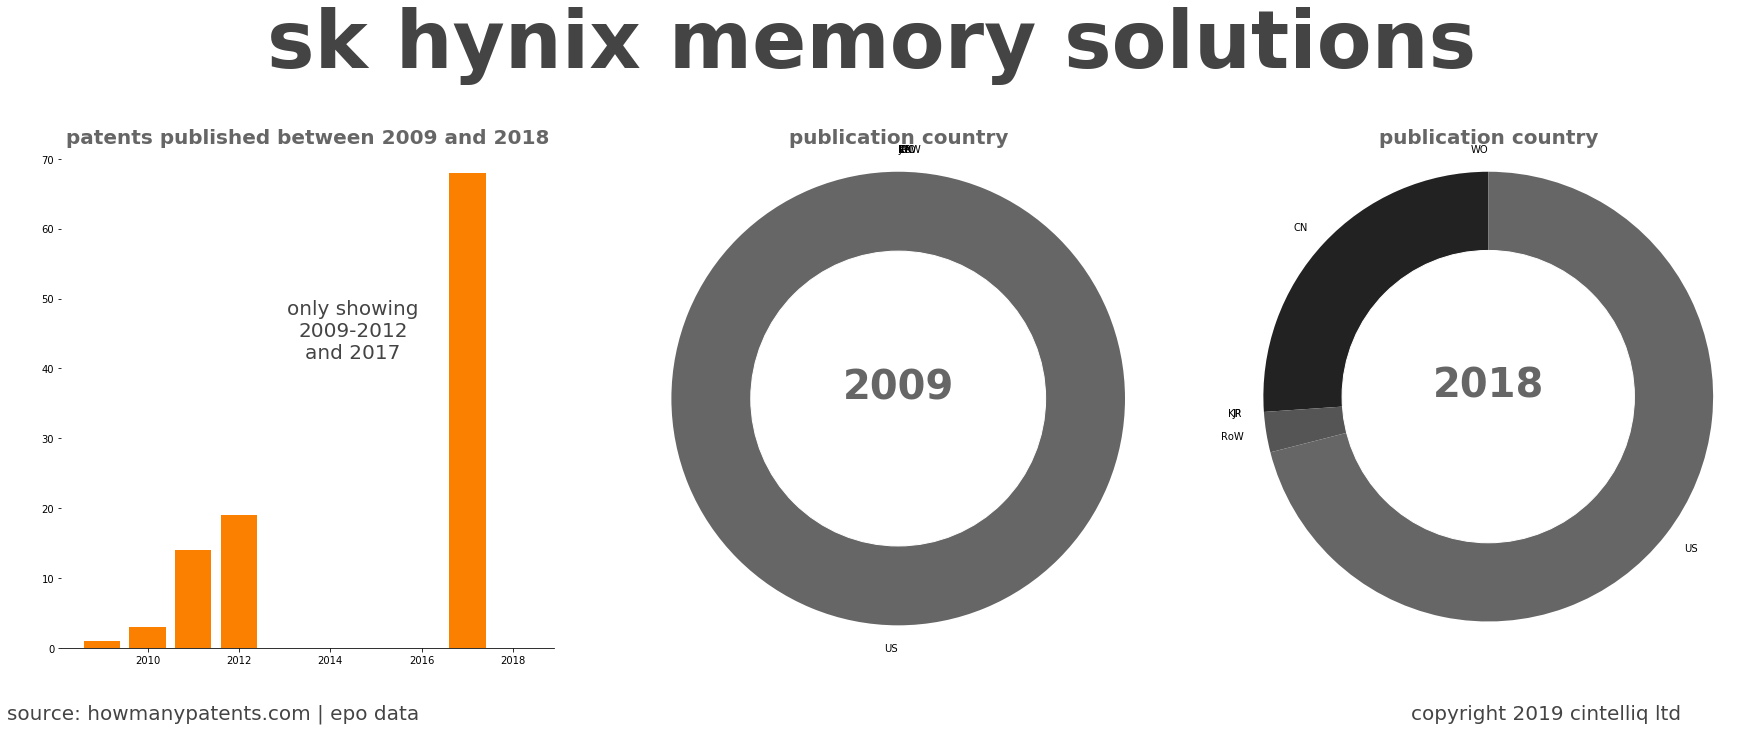 summary of patents for Sk Hynix Memory Solutions